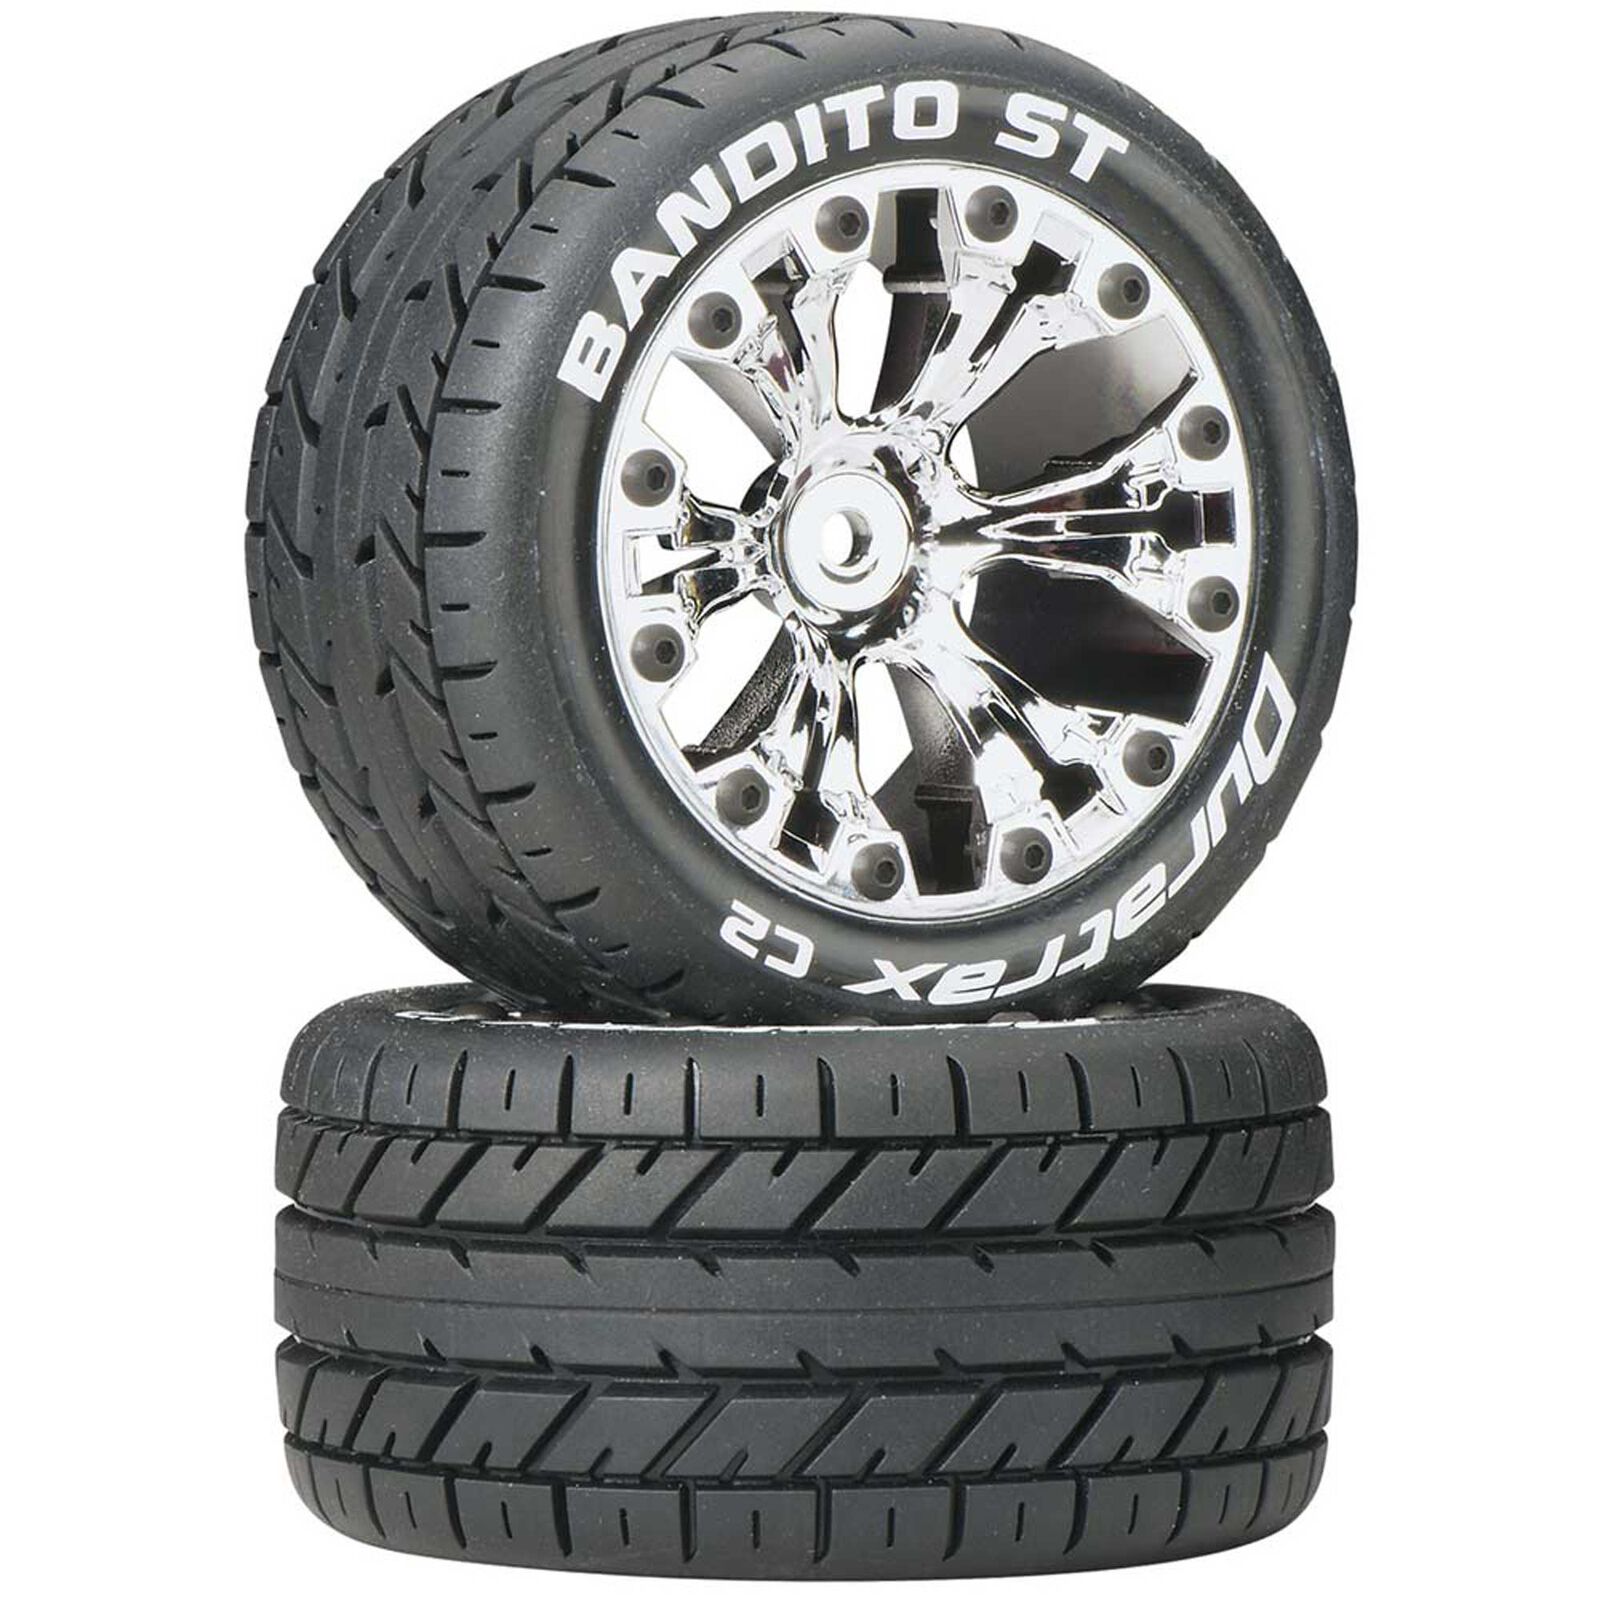 Bandito ST 2.8" 2WD Mounted Rear C2 Tires, Chrome (2)